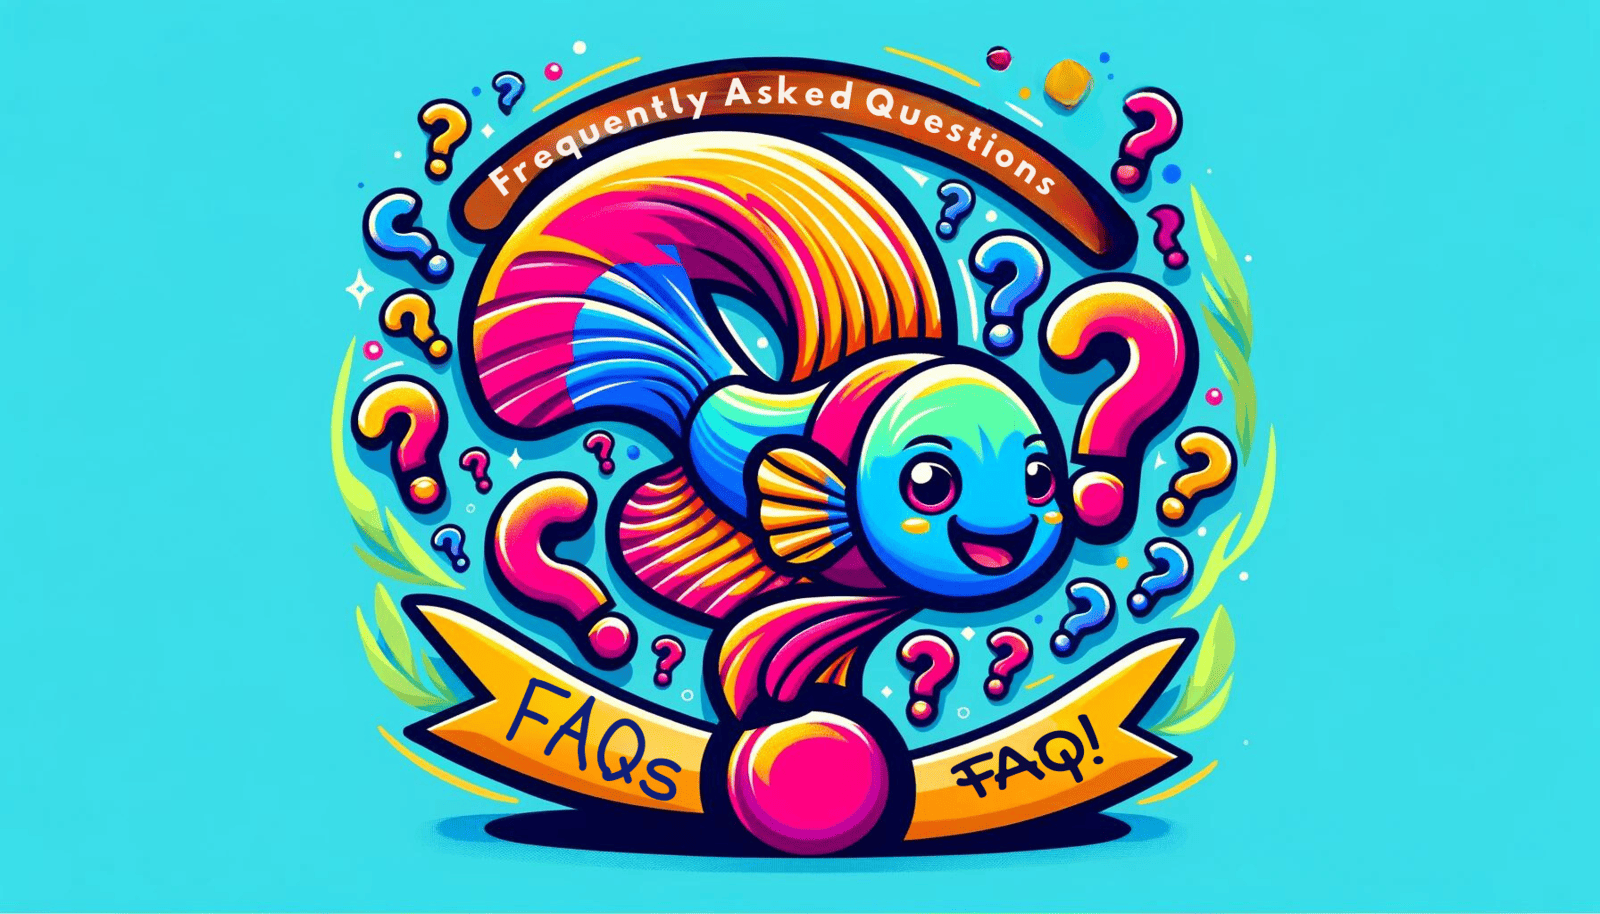 A bright and cheerful illustration designed for a frequently asked questions section, featuring a stylized, colorful Betta fish surrounded by question marks.